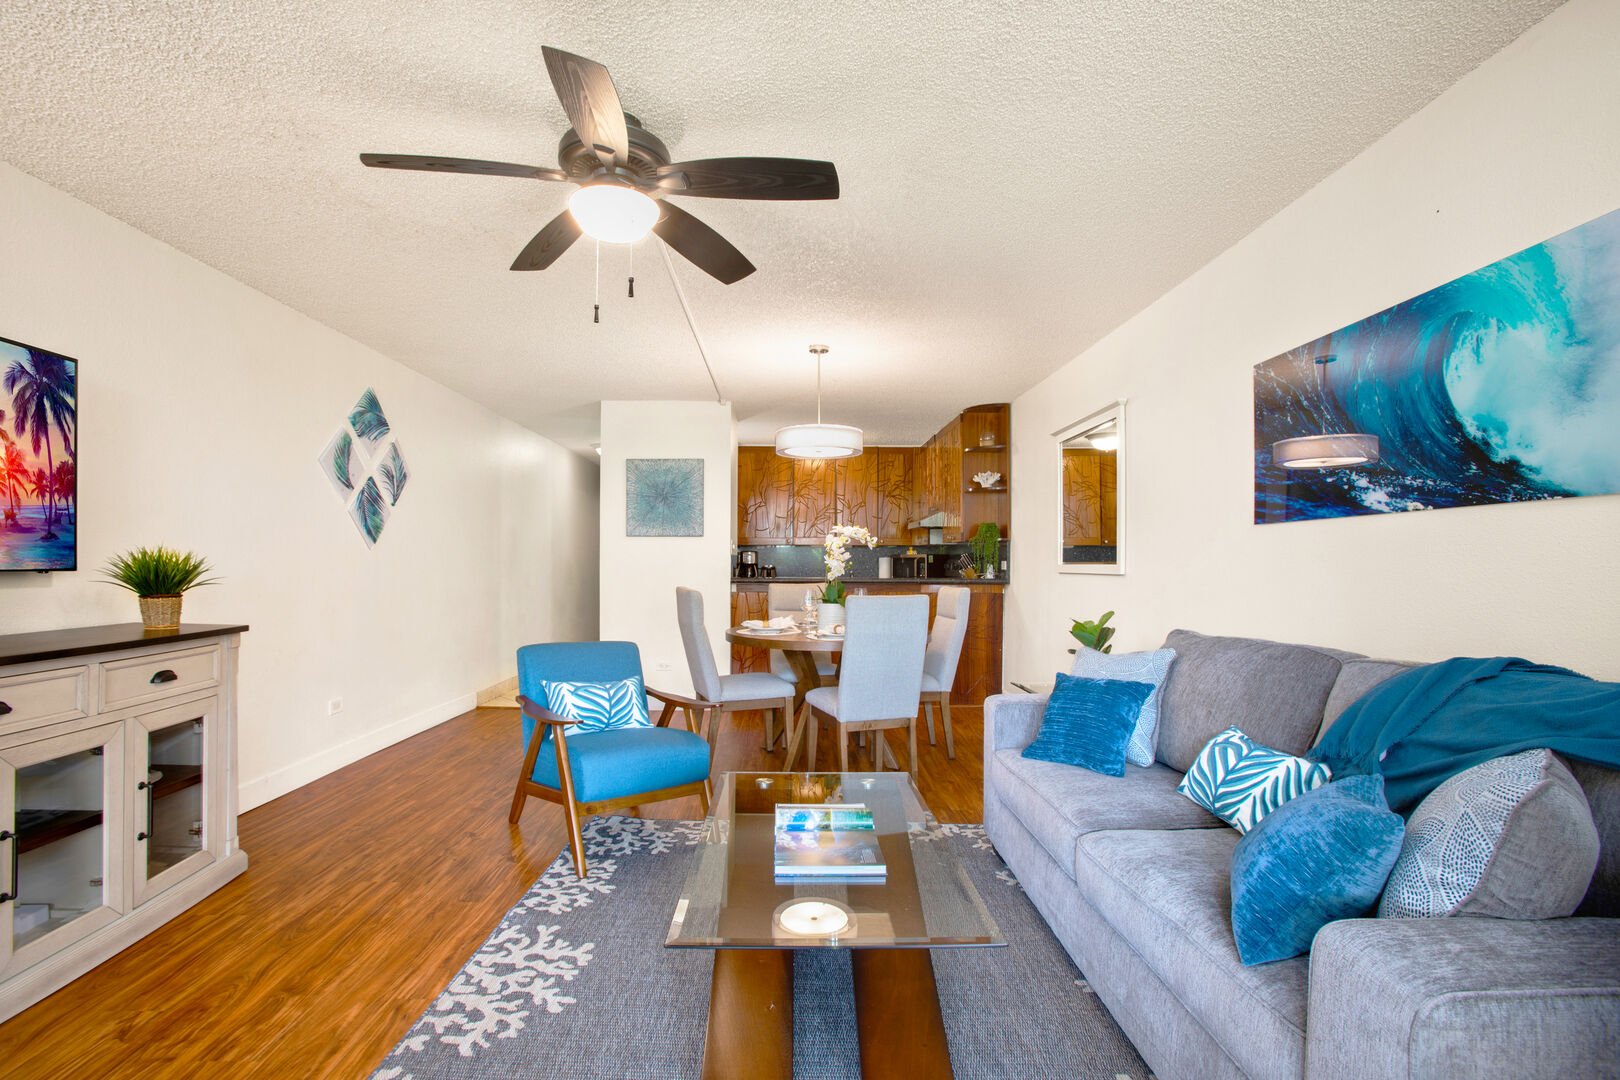 The living room boasts a queen-size sleeper sofa, coffee table, 1 chair, flat screen TV, and ceiling fan with light!